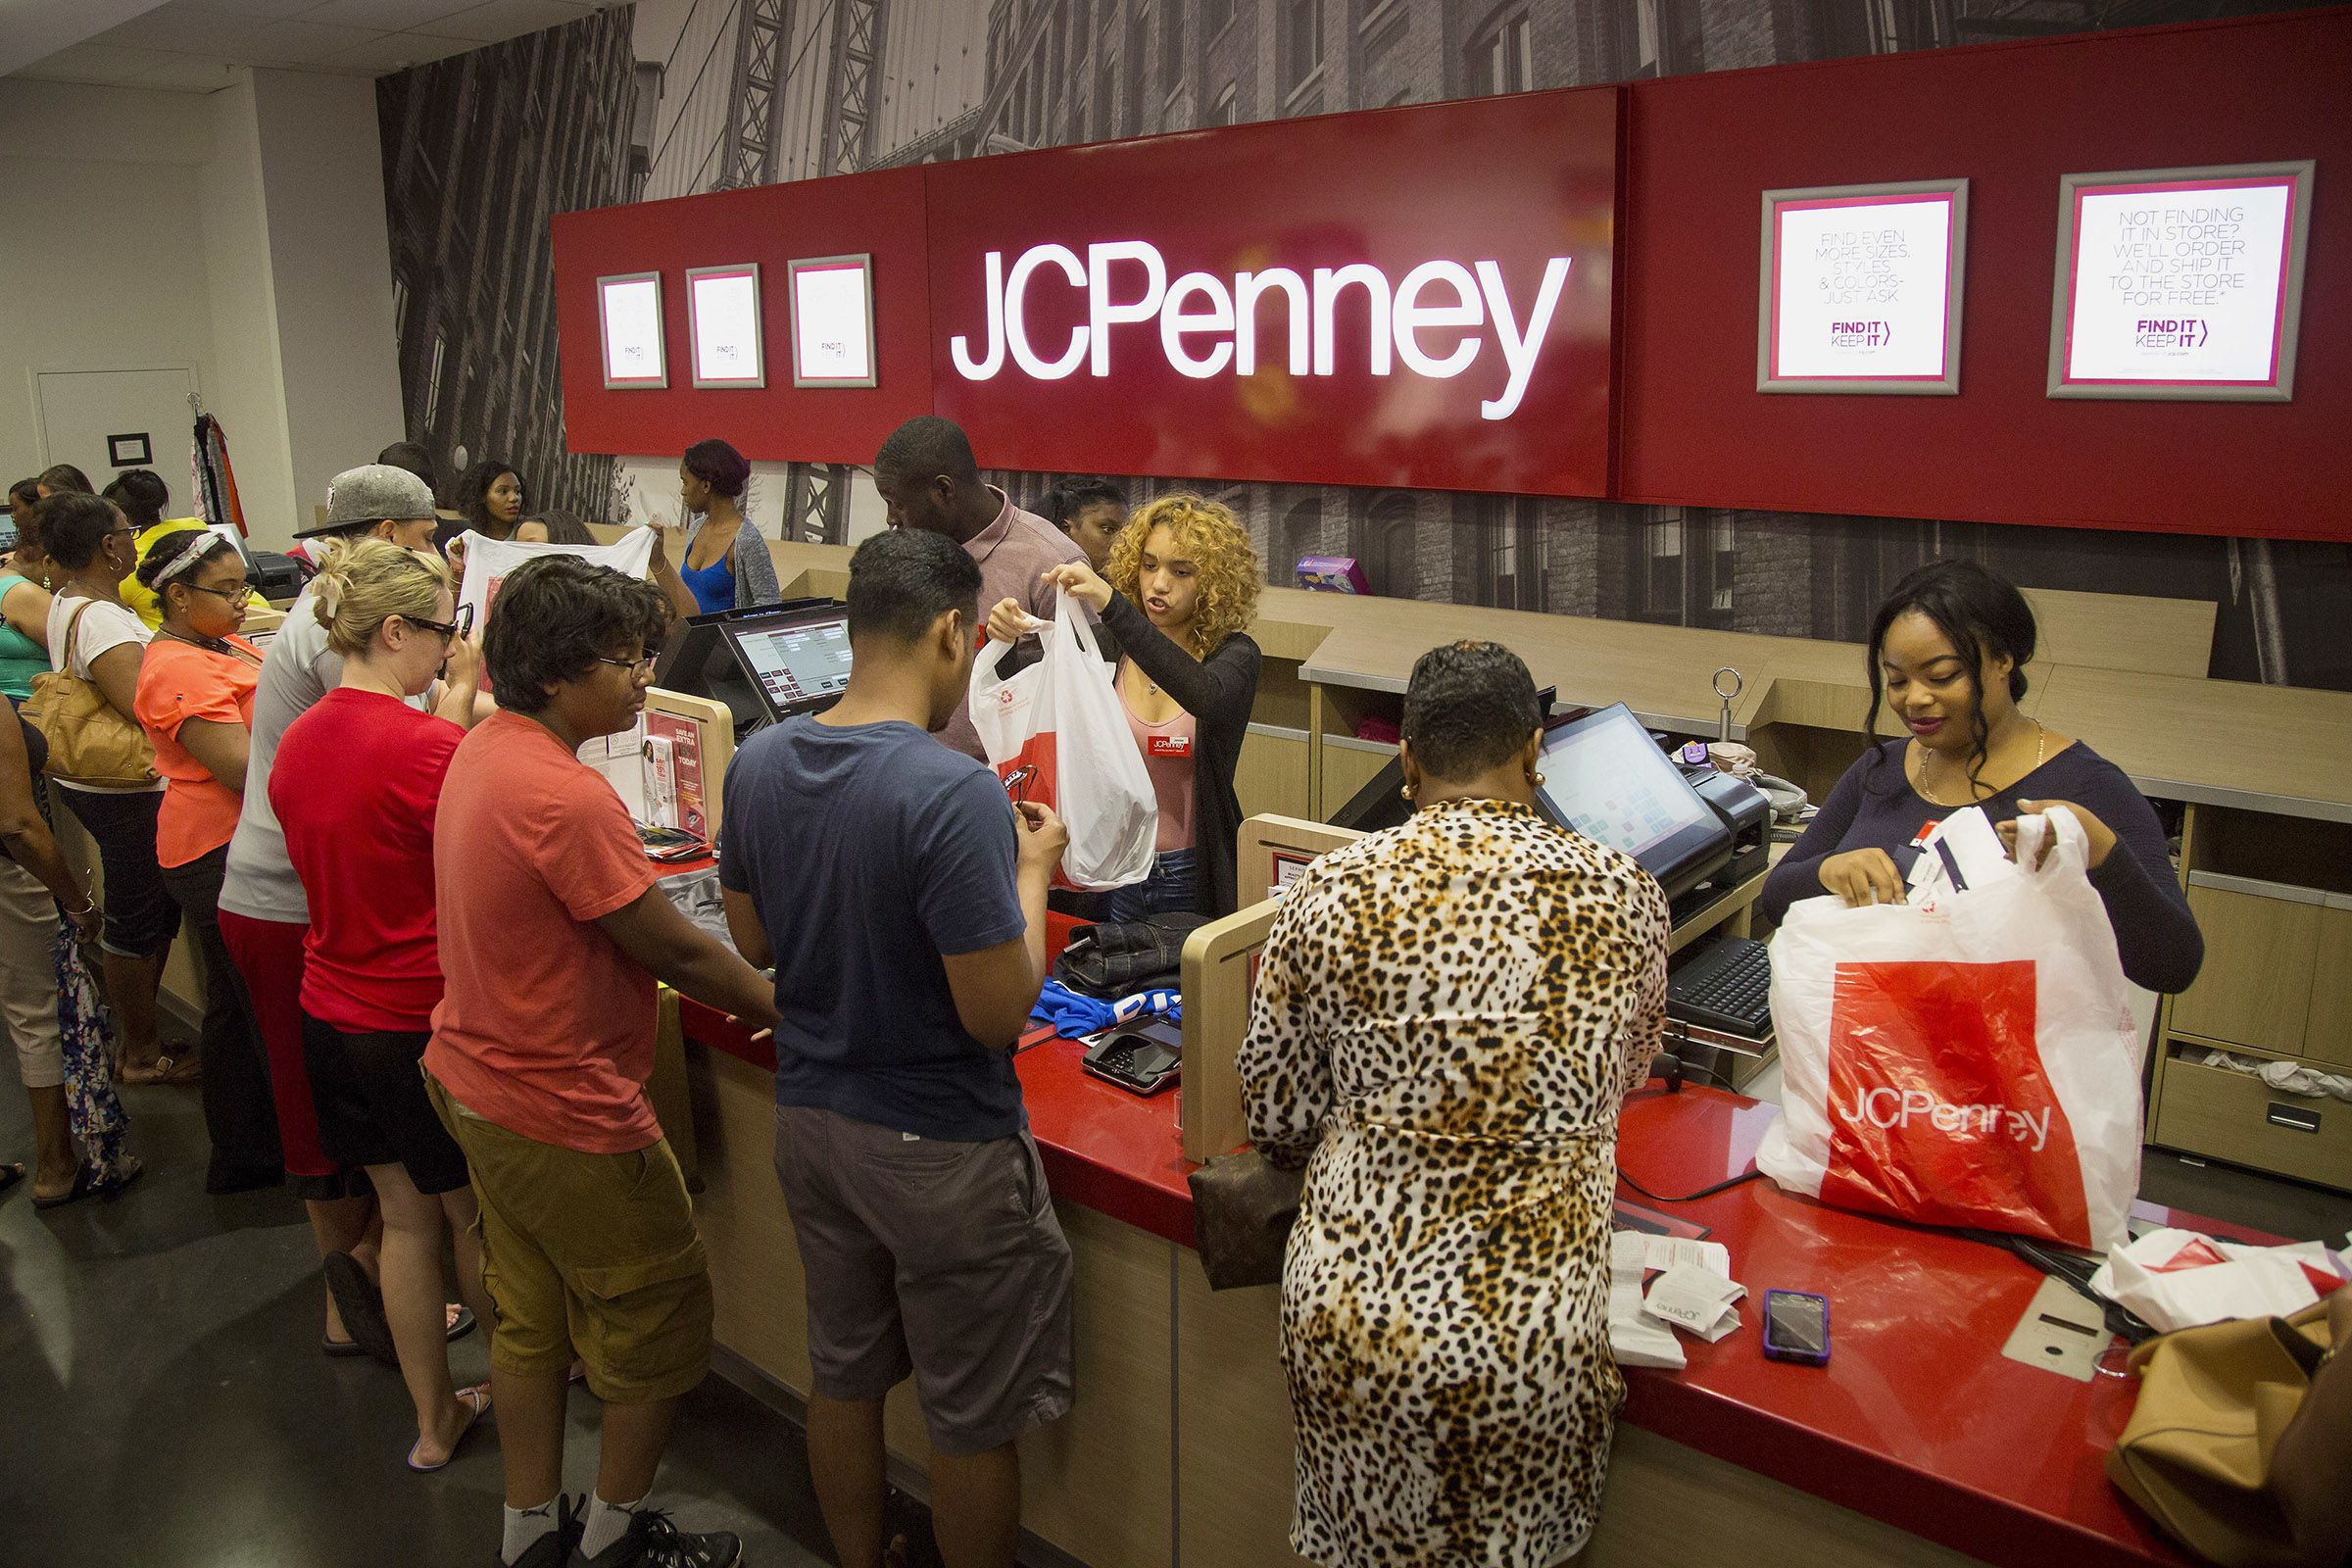 JC Penney is trying new things to stay afloat, but stock could be delisted